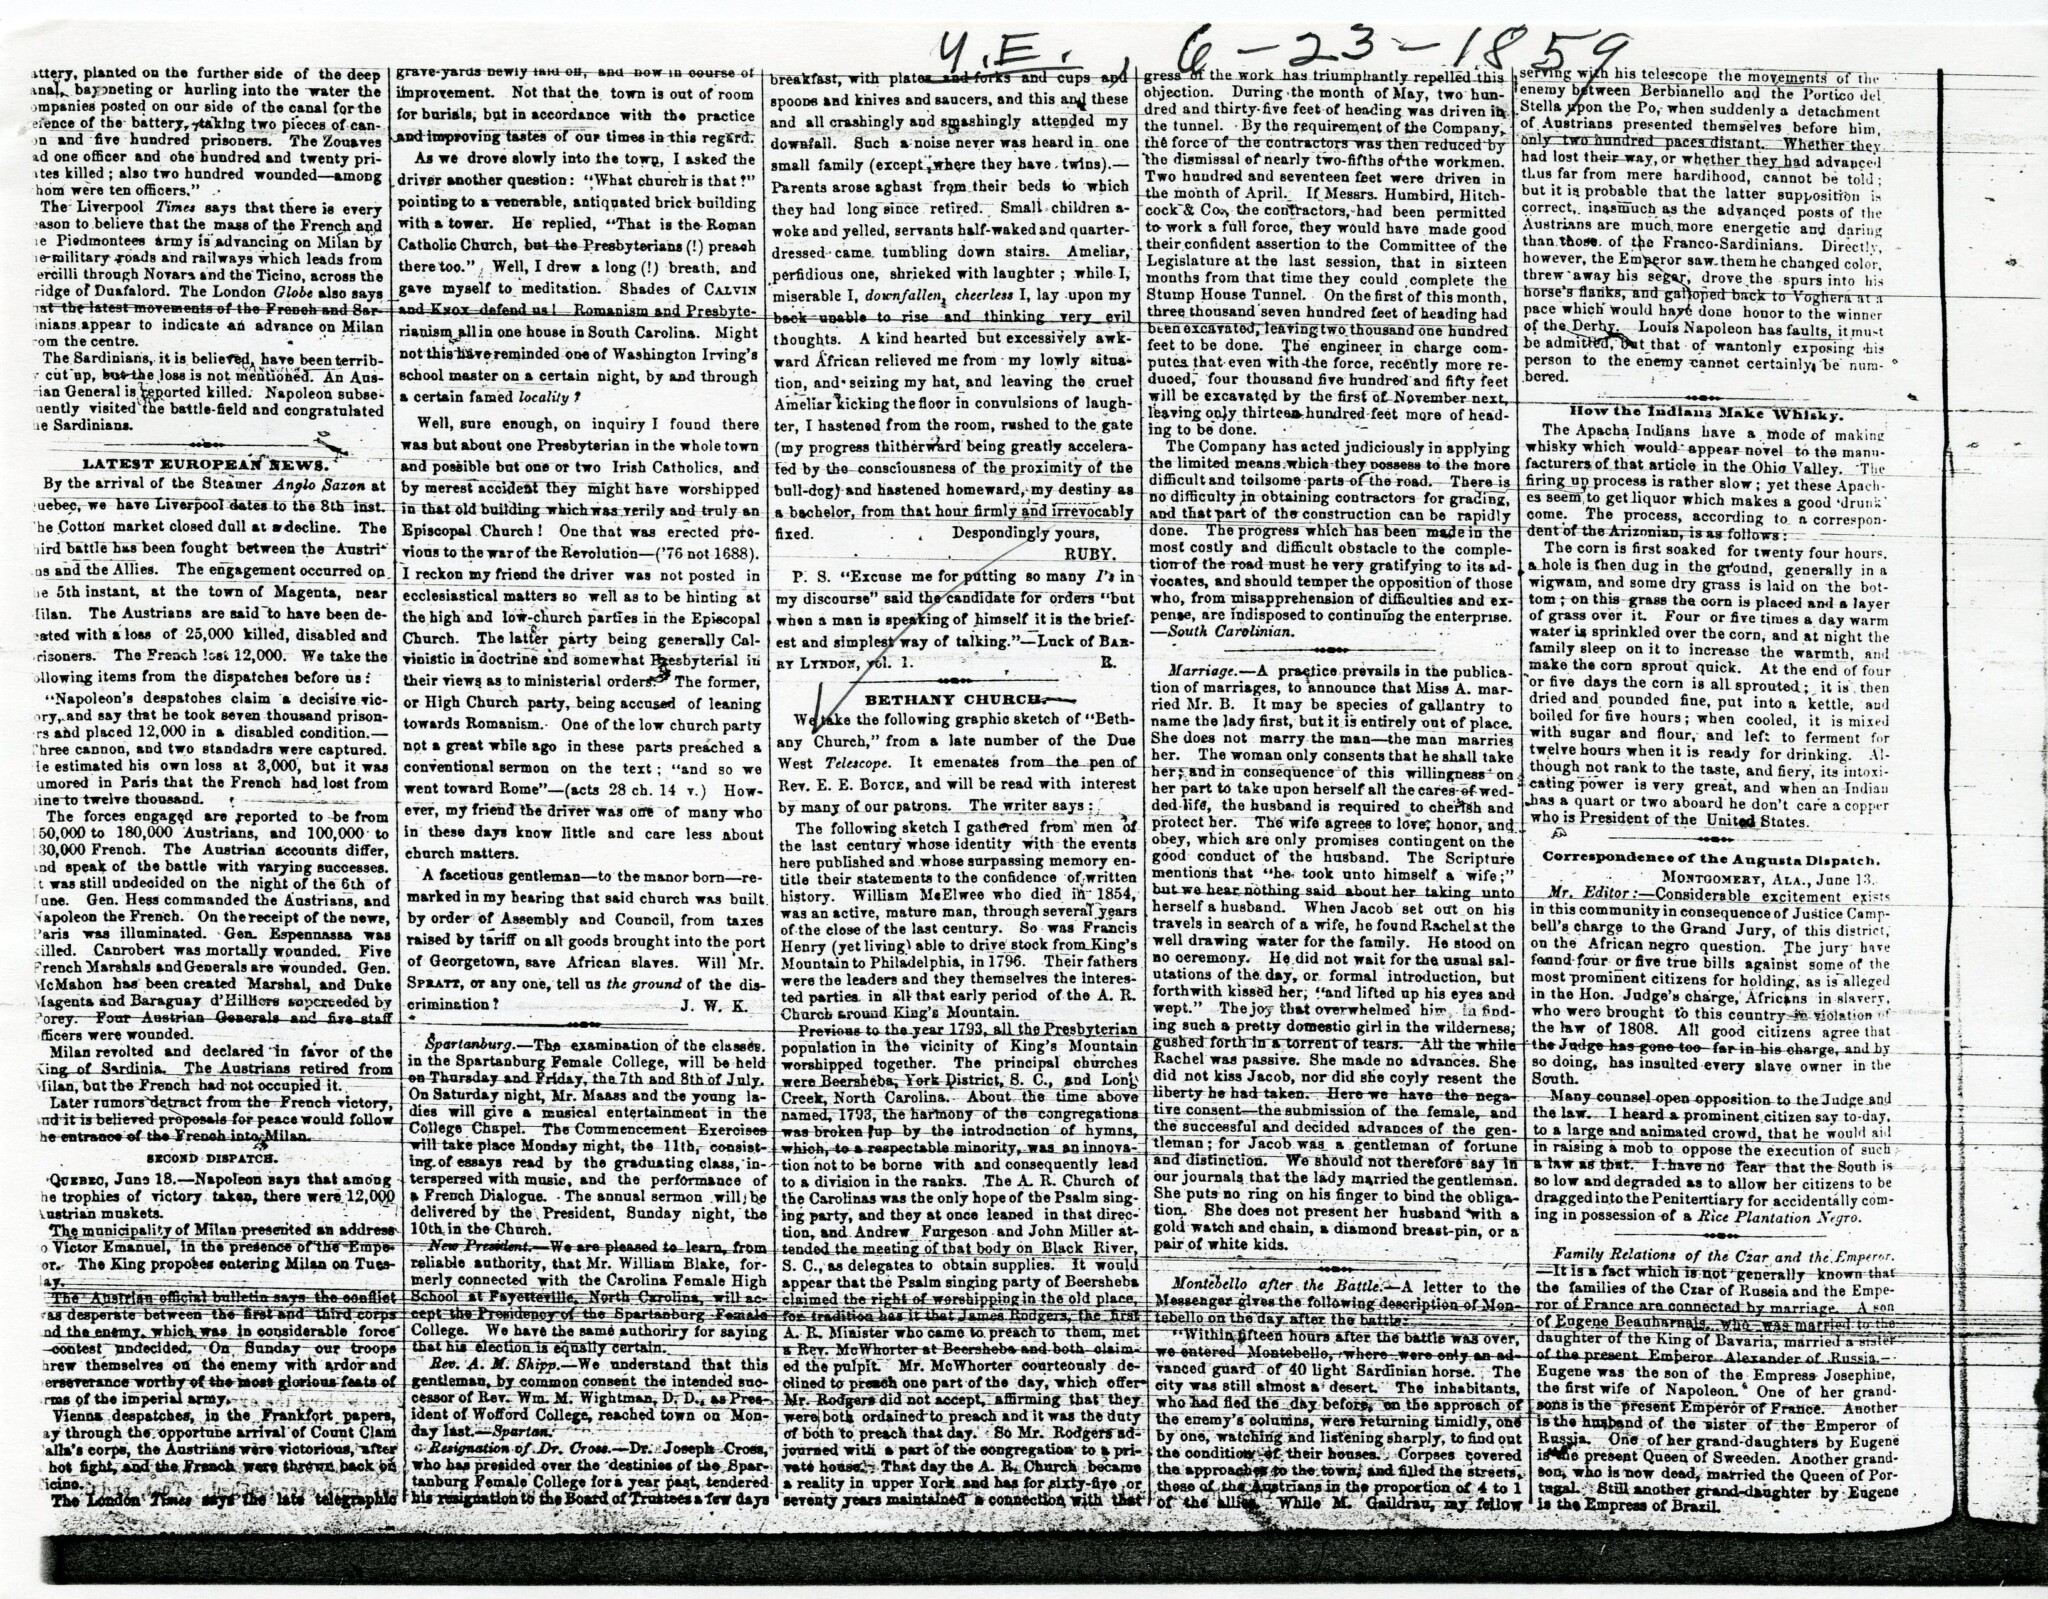 YORKVILLE ENQUIRER ARTICLE ON CHURCH - 1859